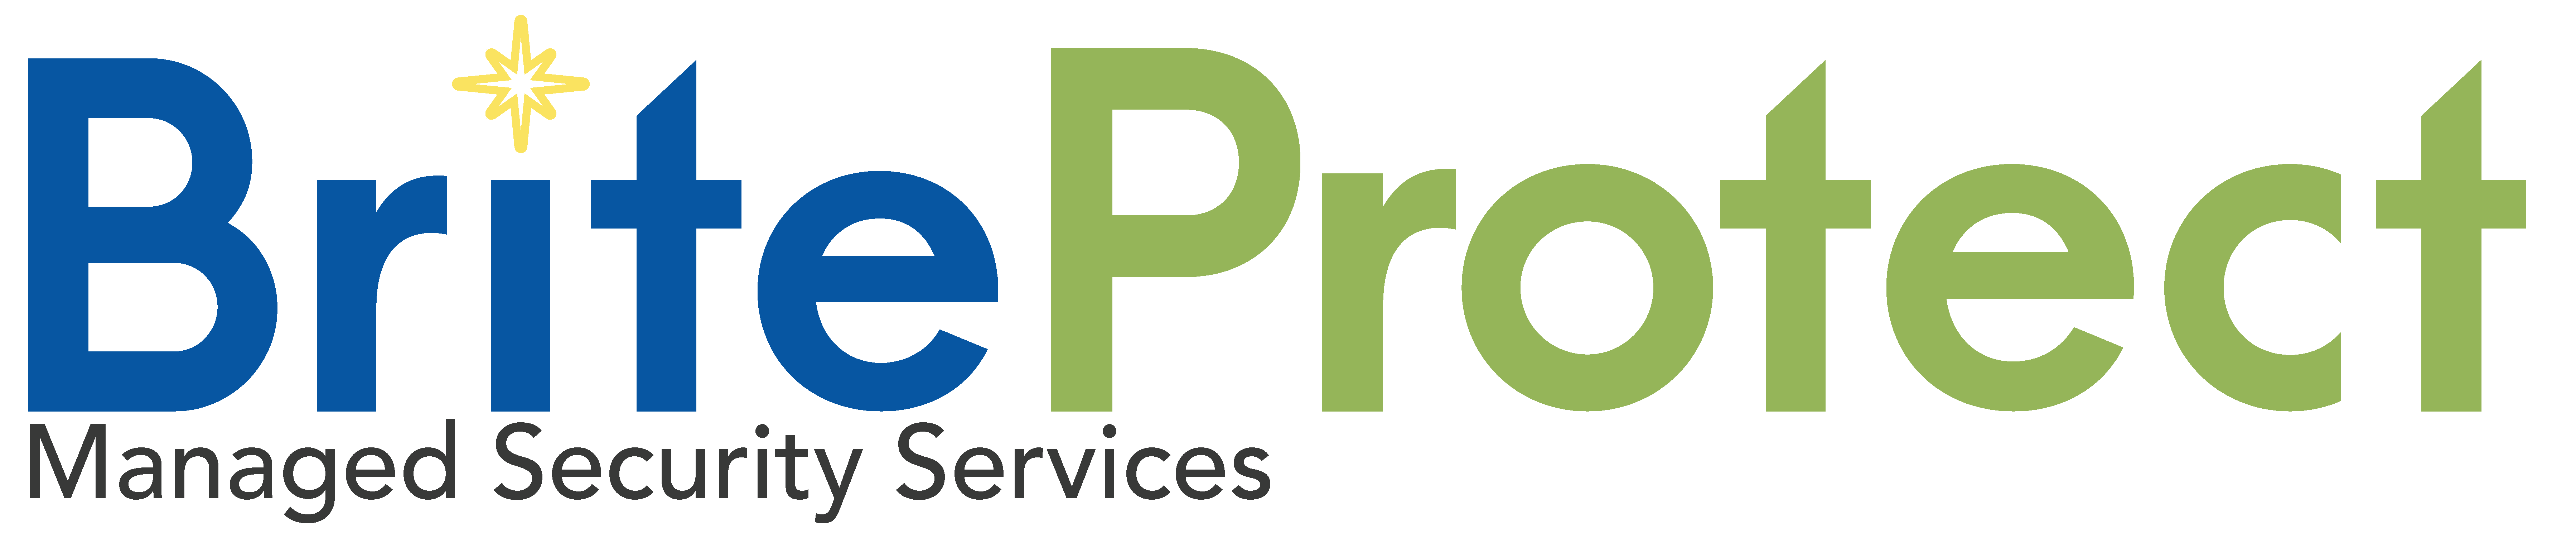 BriteProtect logo with Managed Security Services tag